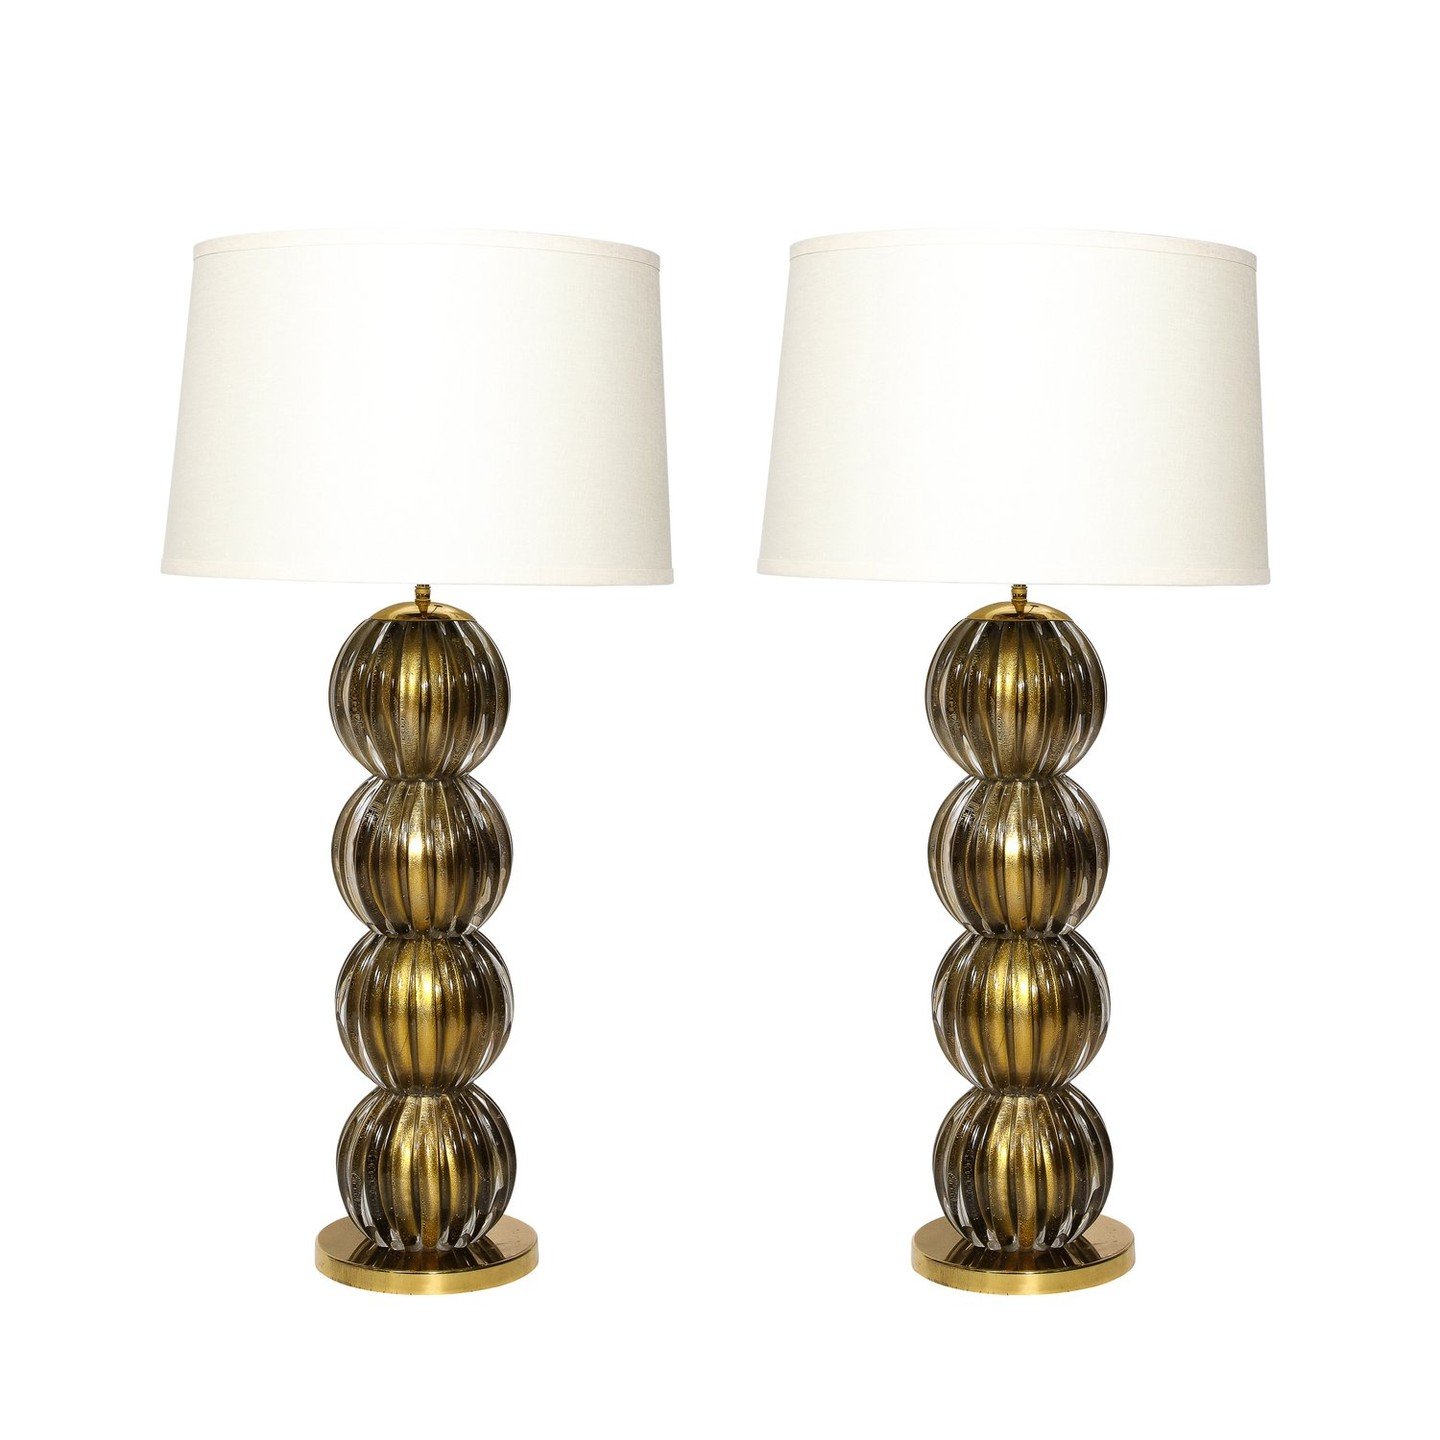 Large Scale Modernist Hand-Blown Murano Glass Table Lamps in Smoked Gold

This impressive pair of large scale table lamps were realized in Murano, Italy- the island off the coast of Venice renowned for centuries for its superlative glass production- 